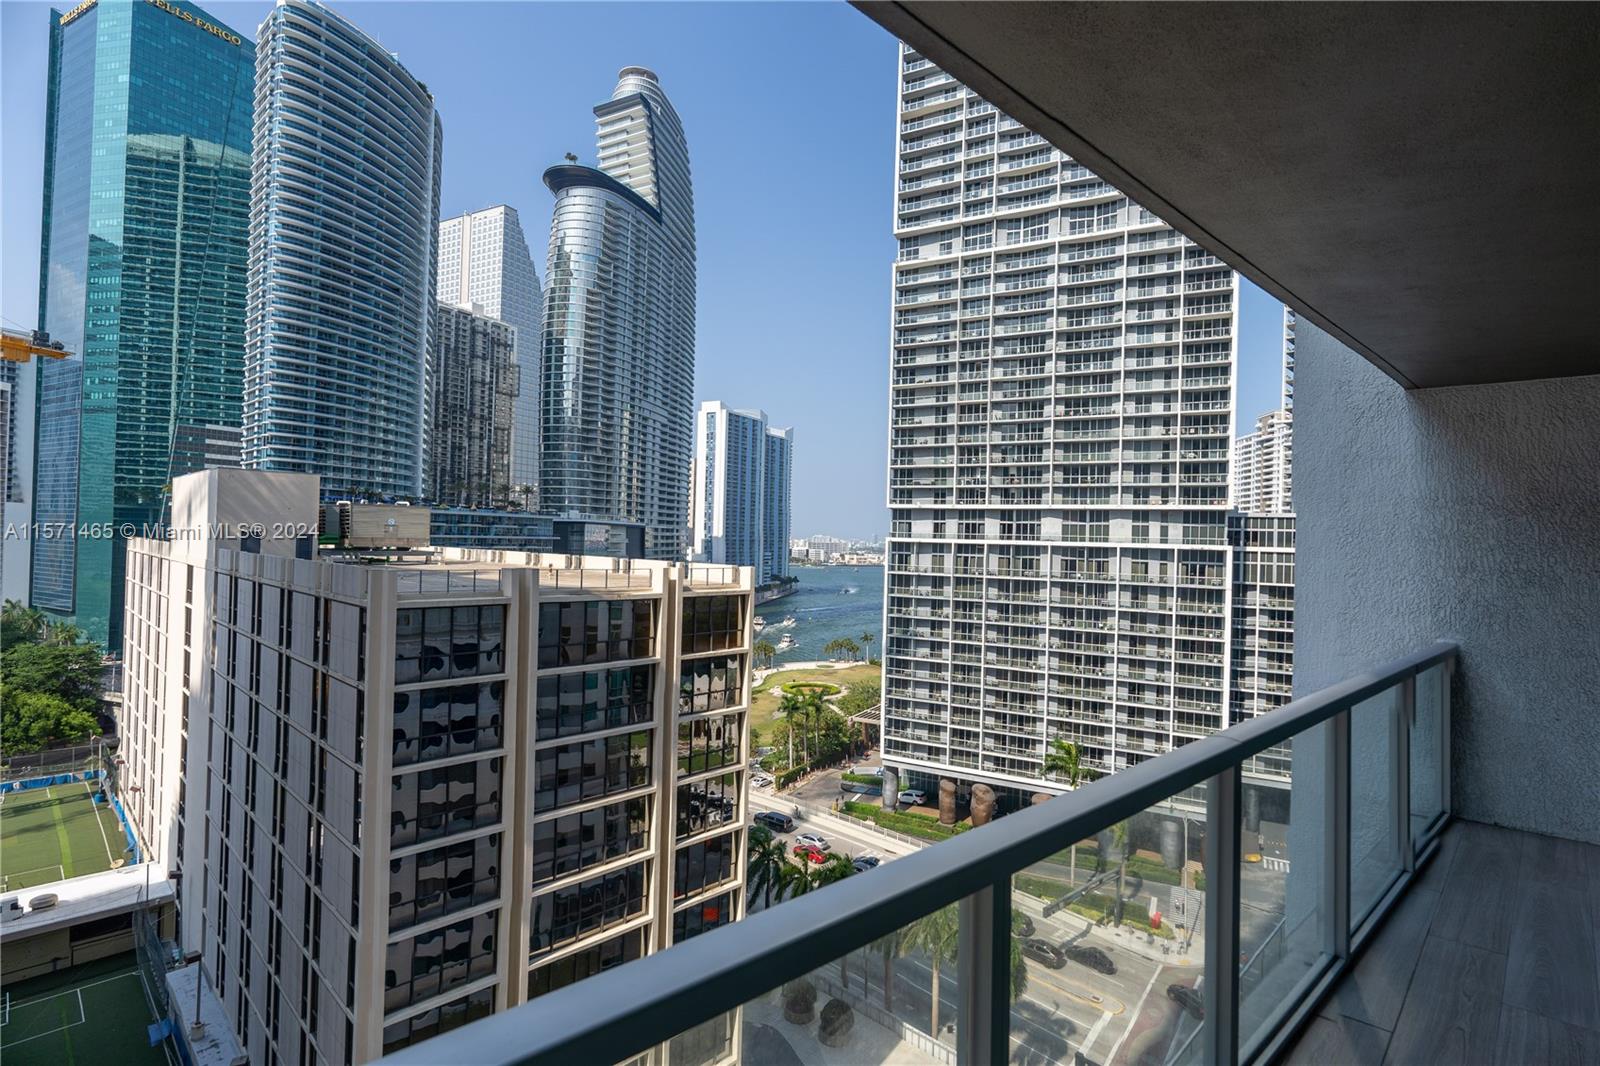 Bright 2/2 Condo in iconic 500 Brickell East Tower with stunning views: ocean, pool, or Brickell City Skyline. Features 2 large bedrooms with motorized blackout shades, privacy shades on all windows, and ample storage including walk-in closets. The apartment comes partially furnished: Master Bedroom with King Bed, night tables, and 50” TV. Living Room includes a dining table, bench, large 3-seat couch with chaise lounge, and a recliner. Equipped with top-notch stainless steel appliances, coffee machine, new microwave, UV-light treated AC for clean air, smart thermostat, and smart lights. Includes monthly cleaning service, water, Internet, Cable TV, and parking. Amenities: 2 pools, gym, spa, EV chargers, theater, club rooms, massage room, sunset room, valet.